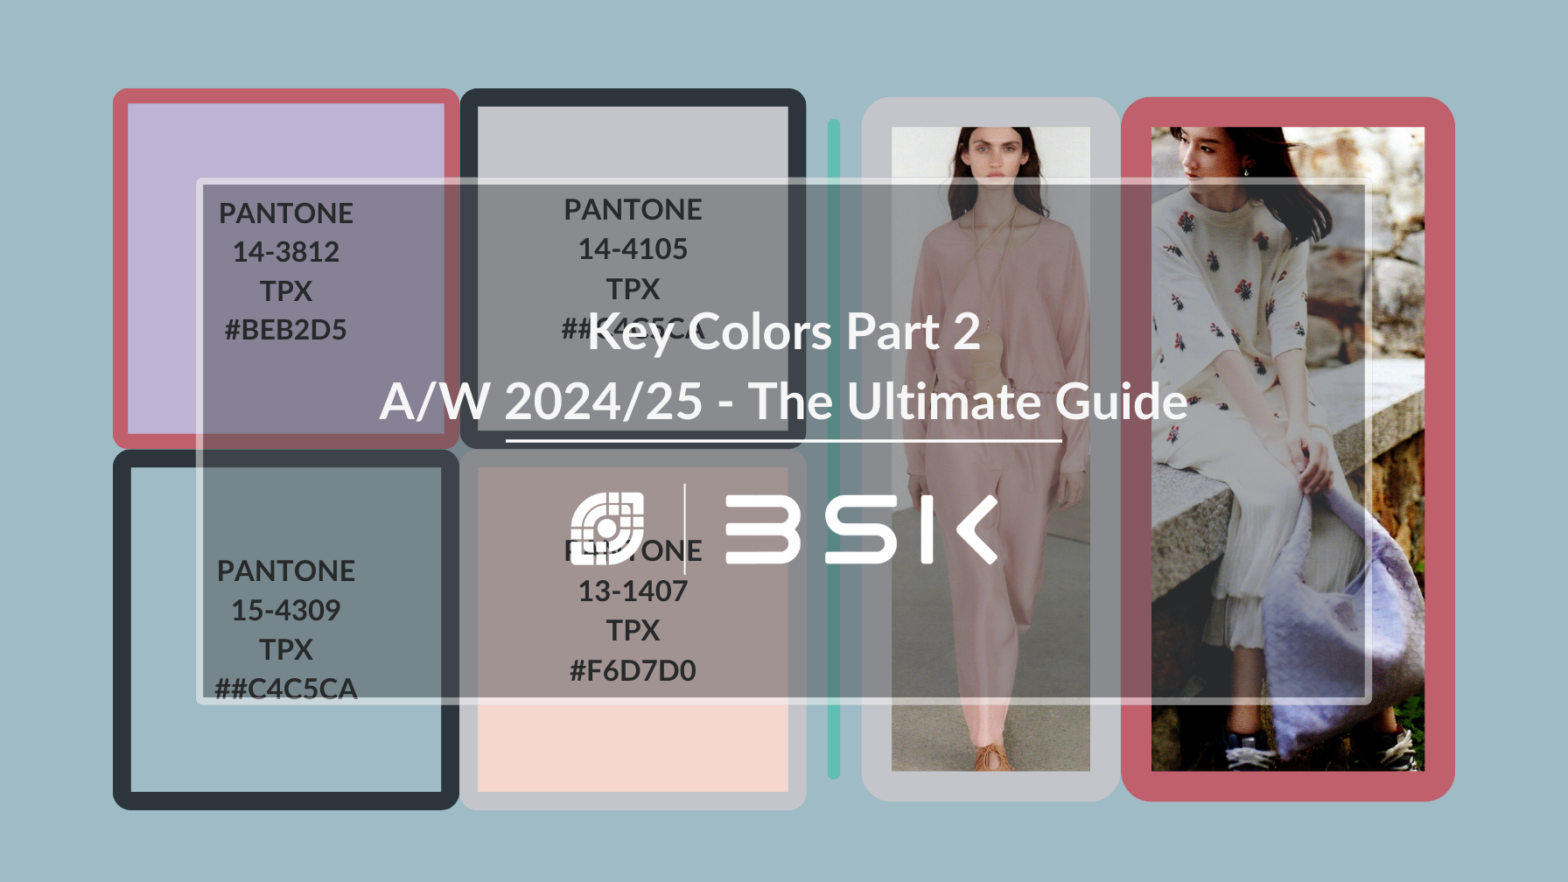 Offering key fashion colors that will also be here for the Autumn 2024 and the winter season 2025